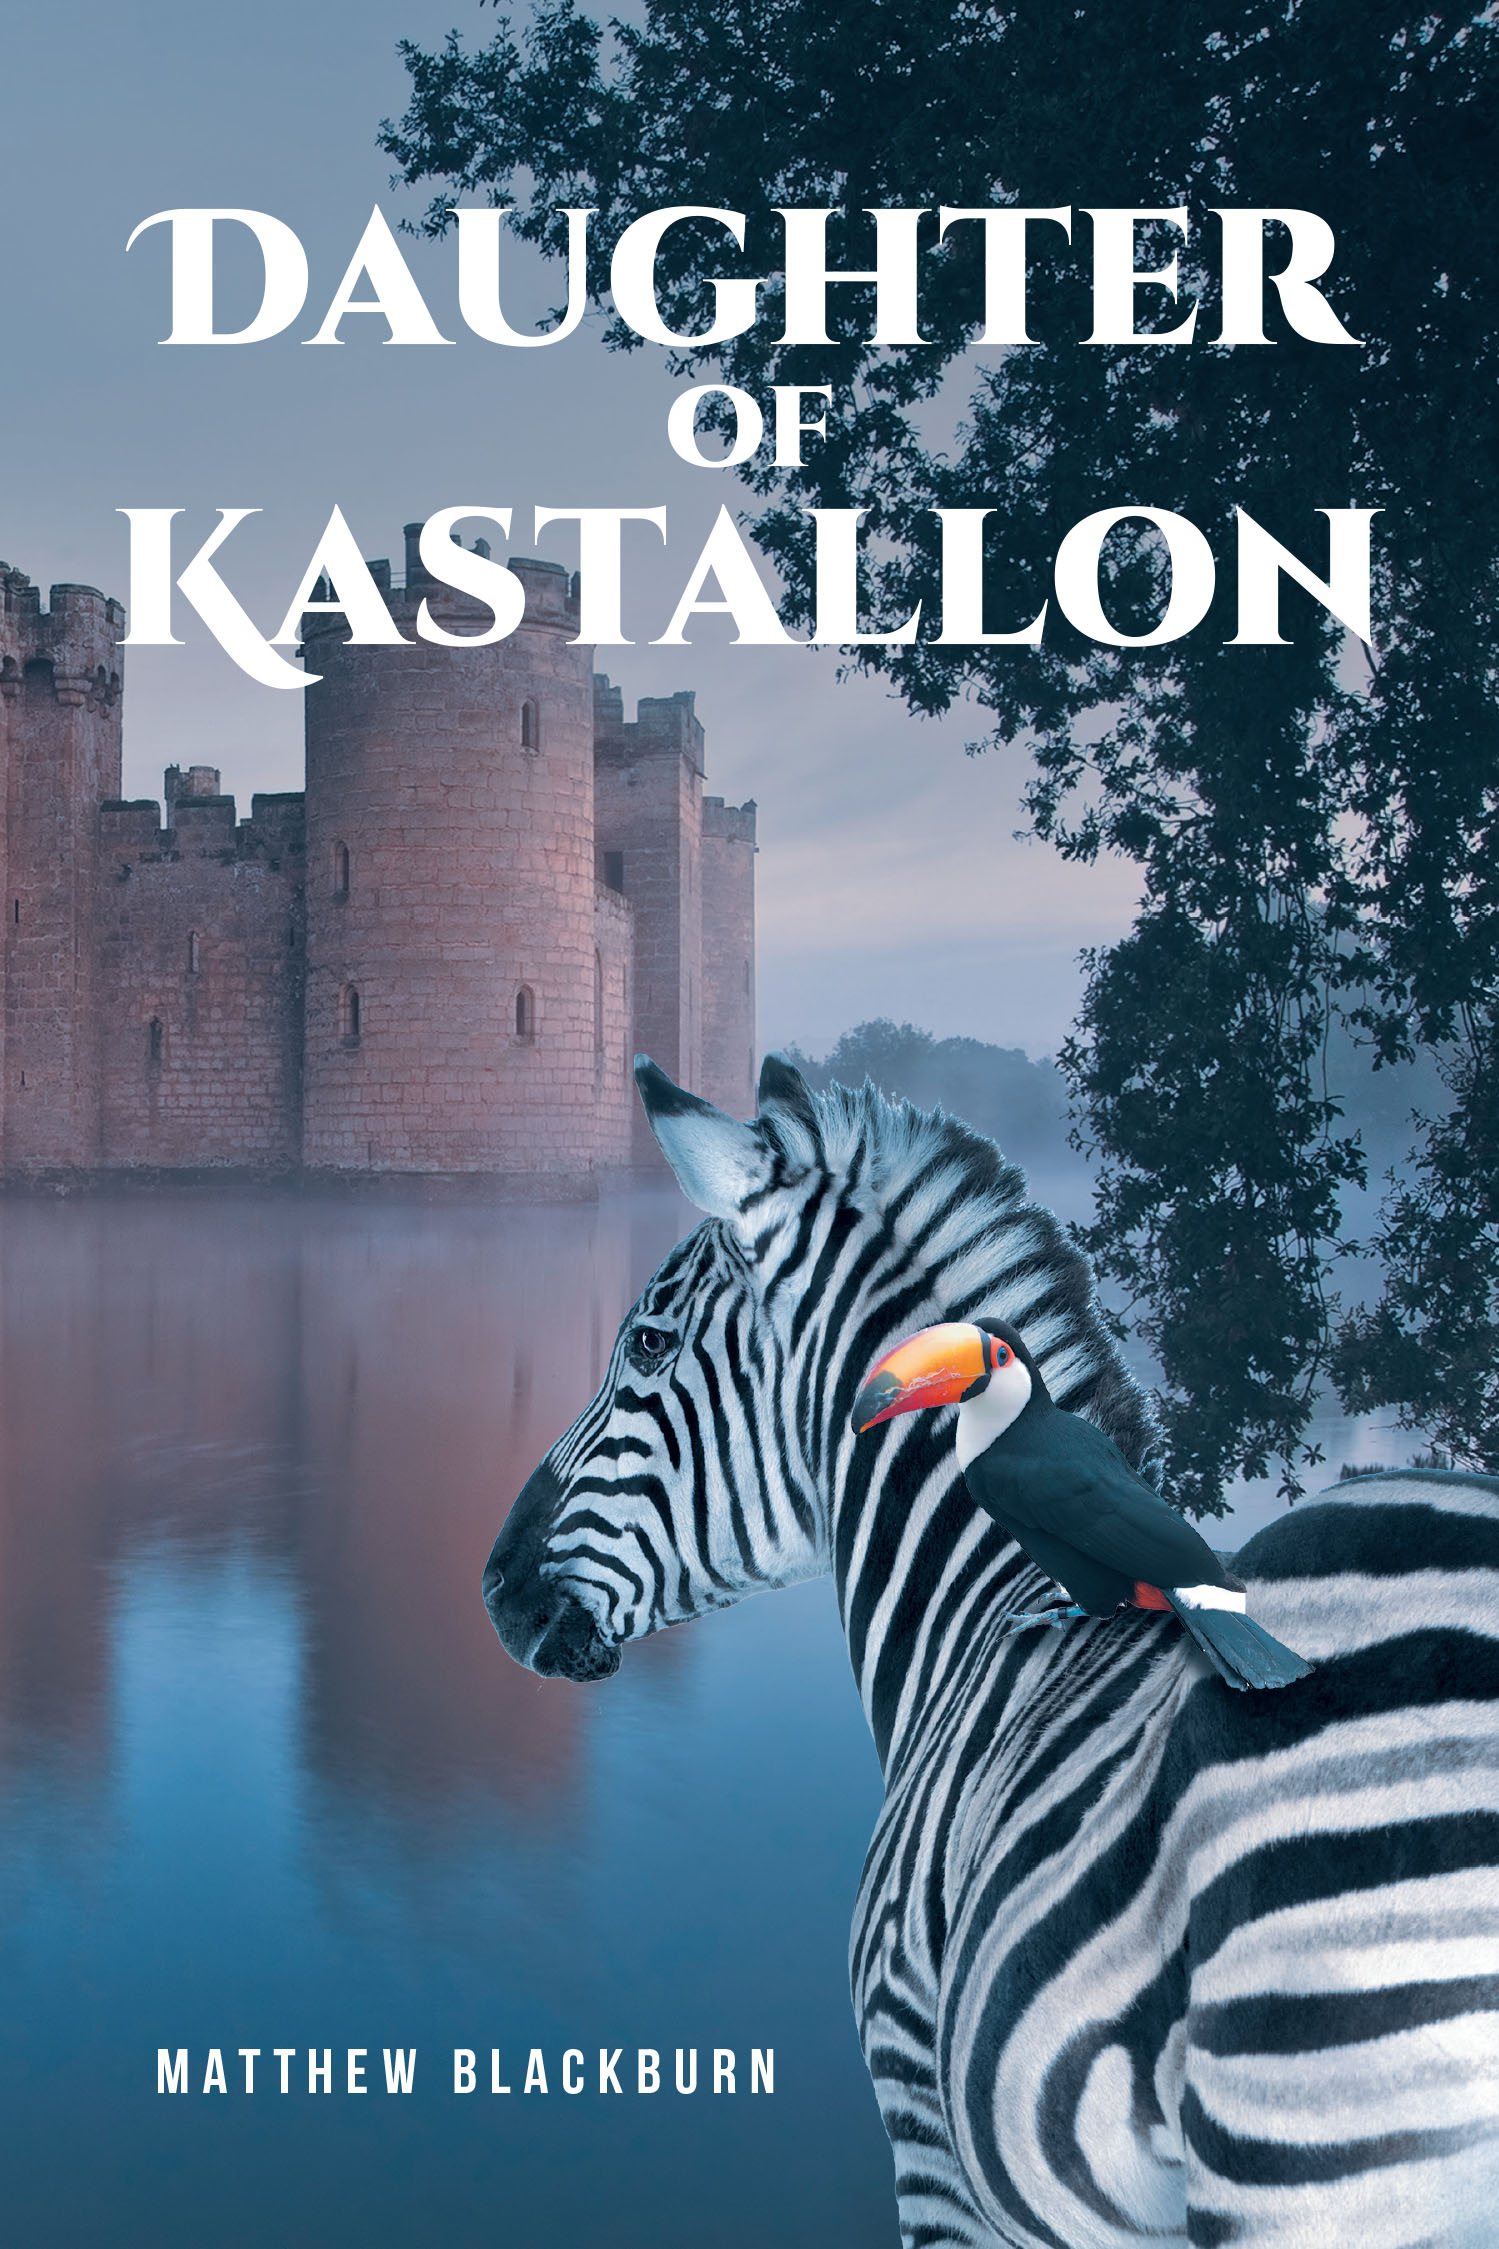 Matthew Blackburn’s New Book, "Daughter of Kastallon," is a Thrilling Tale of Ancient Curses, Mythical Creatures, and a Young Heroine's Quest for Destiny